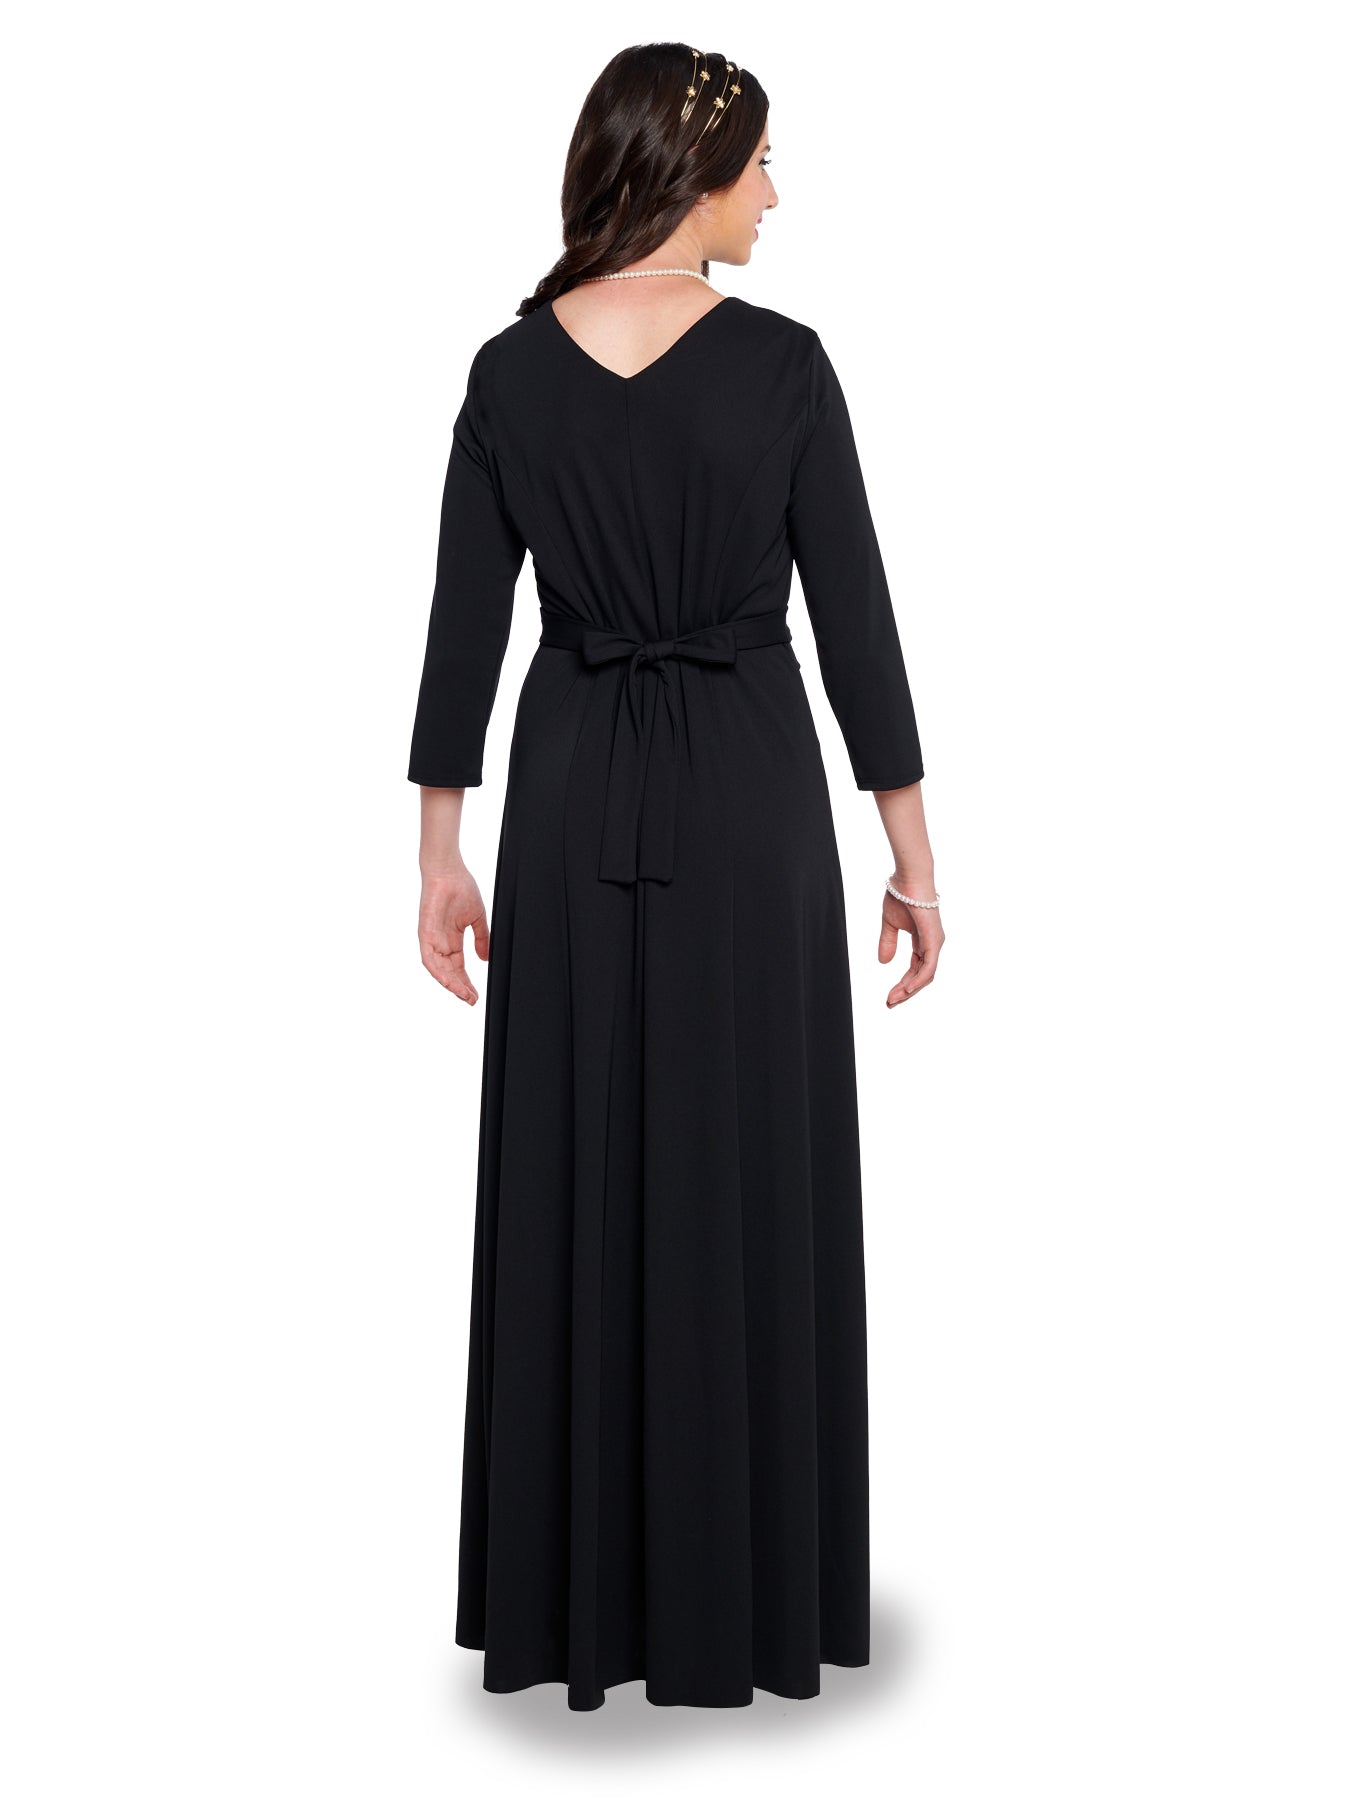 ALEXIS (Style #122) - High Scoop Neck, 3/4 Sleeve, Twist Front Gown